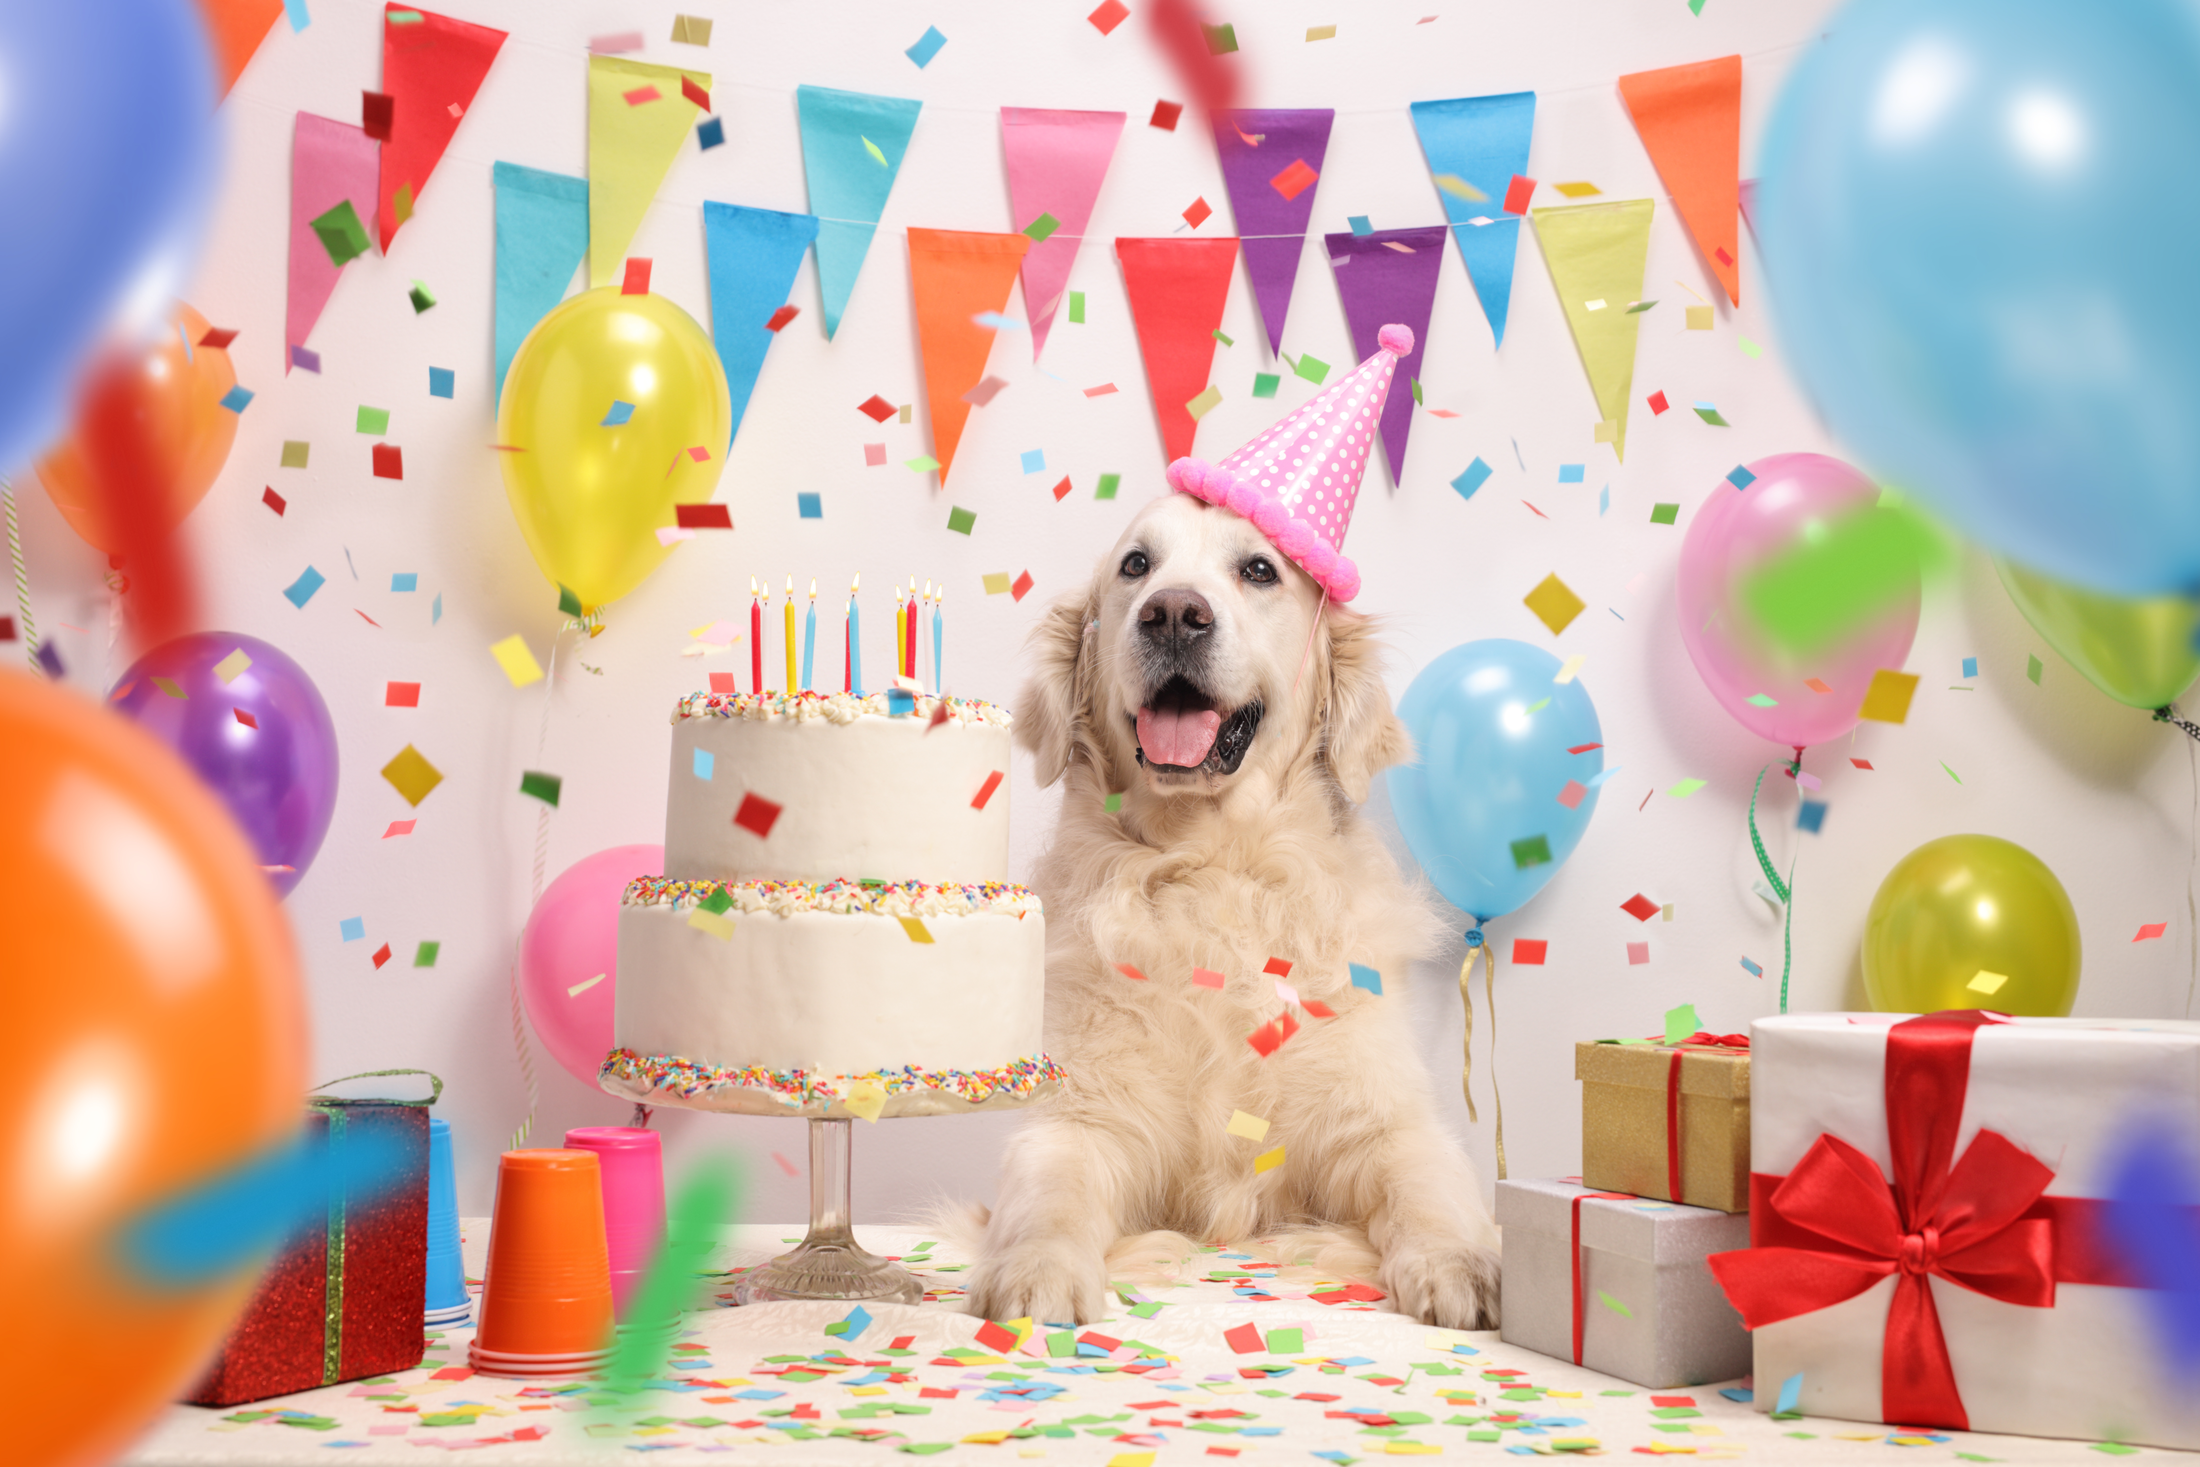 Celebrating is only complete with decorations and cakes. You can make cakes with dog-safe frosting for the whole family to enjoy.